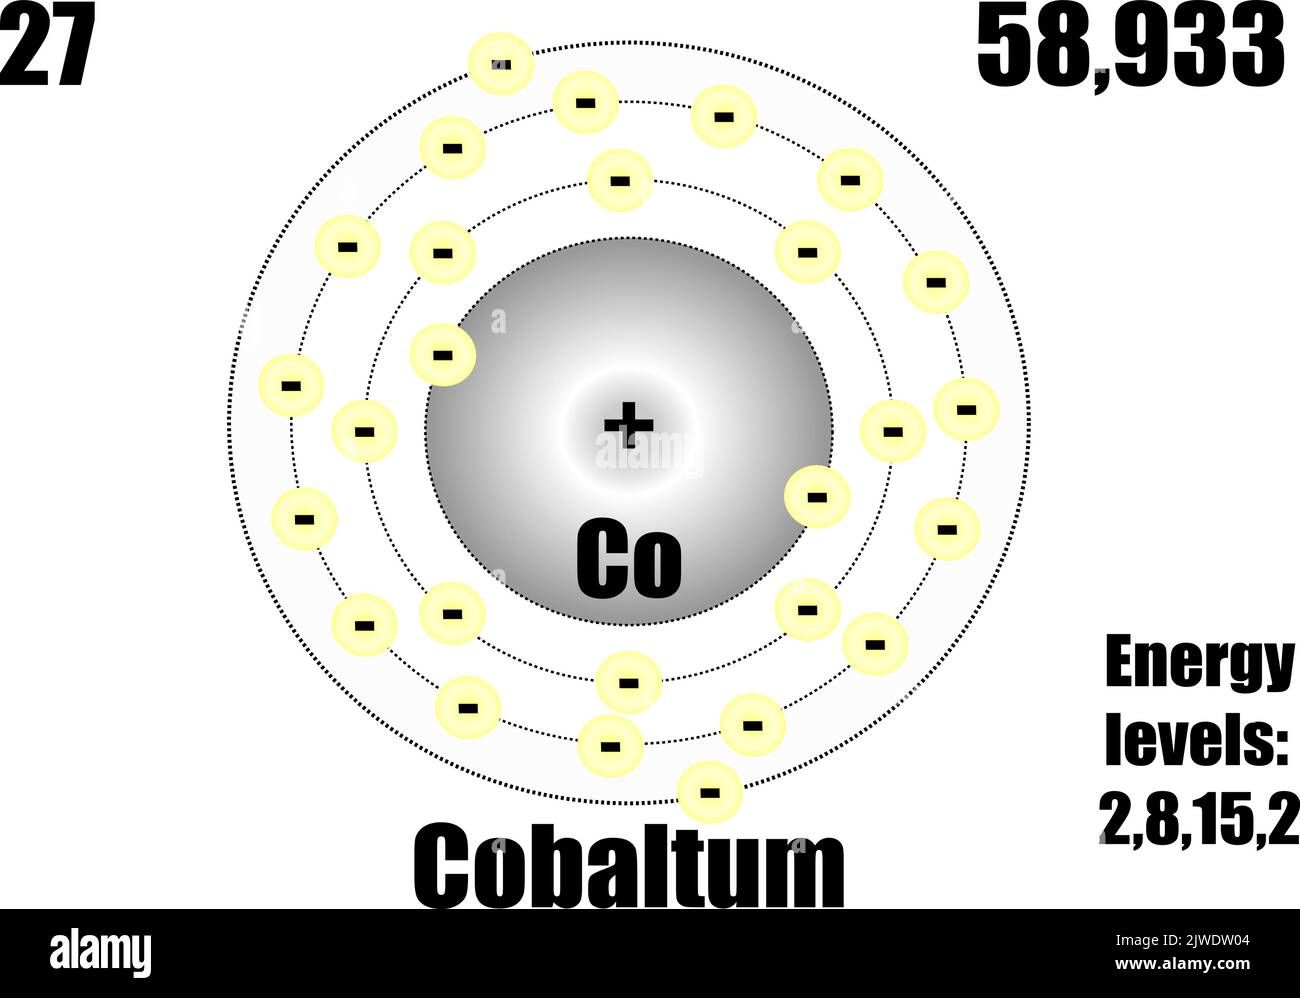 Cobalt atom, with mass and energy levels. Vector illustration Stock Vector